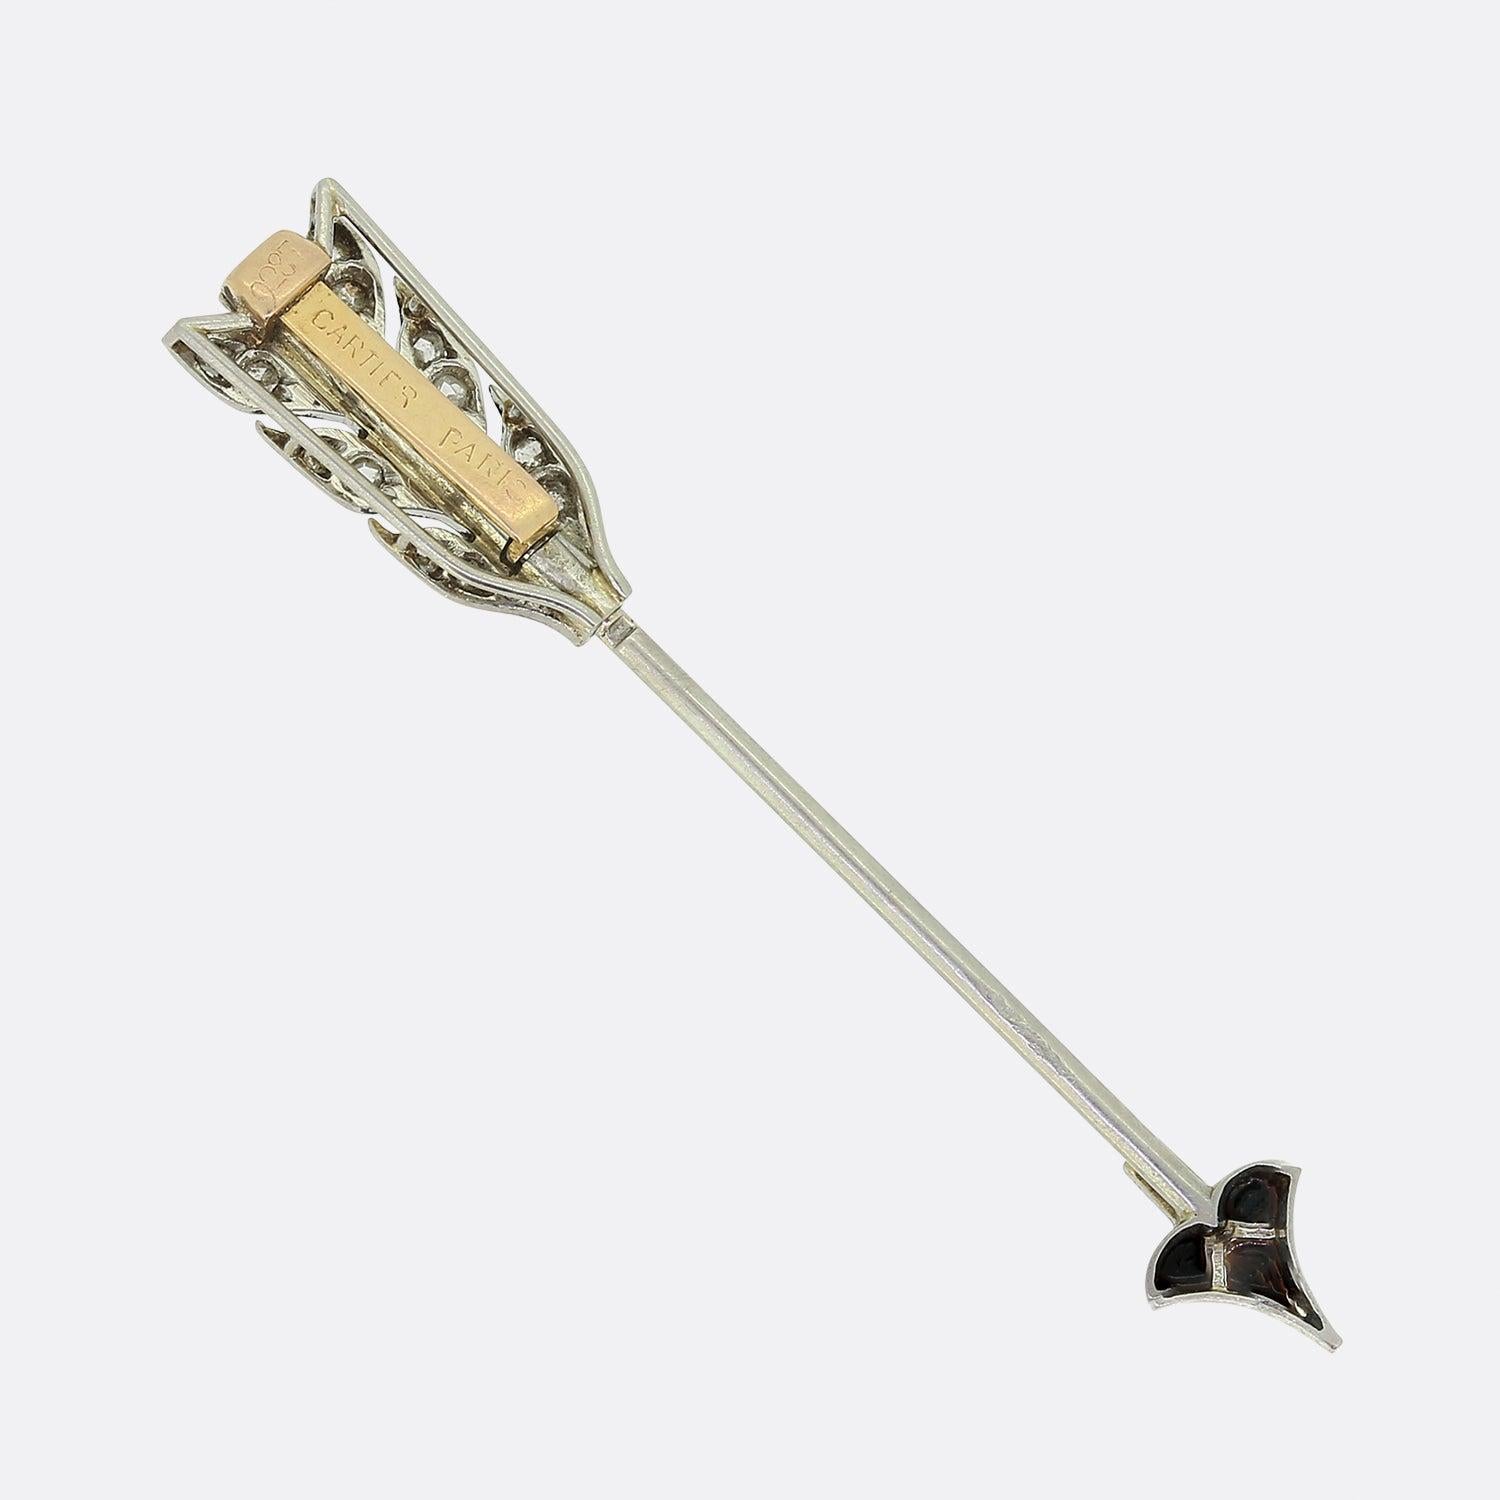 Here we have a fabulously rare Art Deco onyx and diamond arrow jabot pin from the world renowned jewellery house of Cartier. This piece has been crafted in France from platinum and showcases calibre-cut onyx set at the tip and shaft whilst the